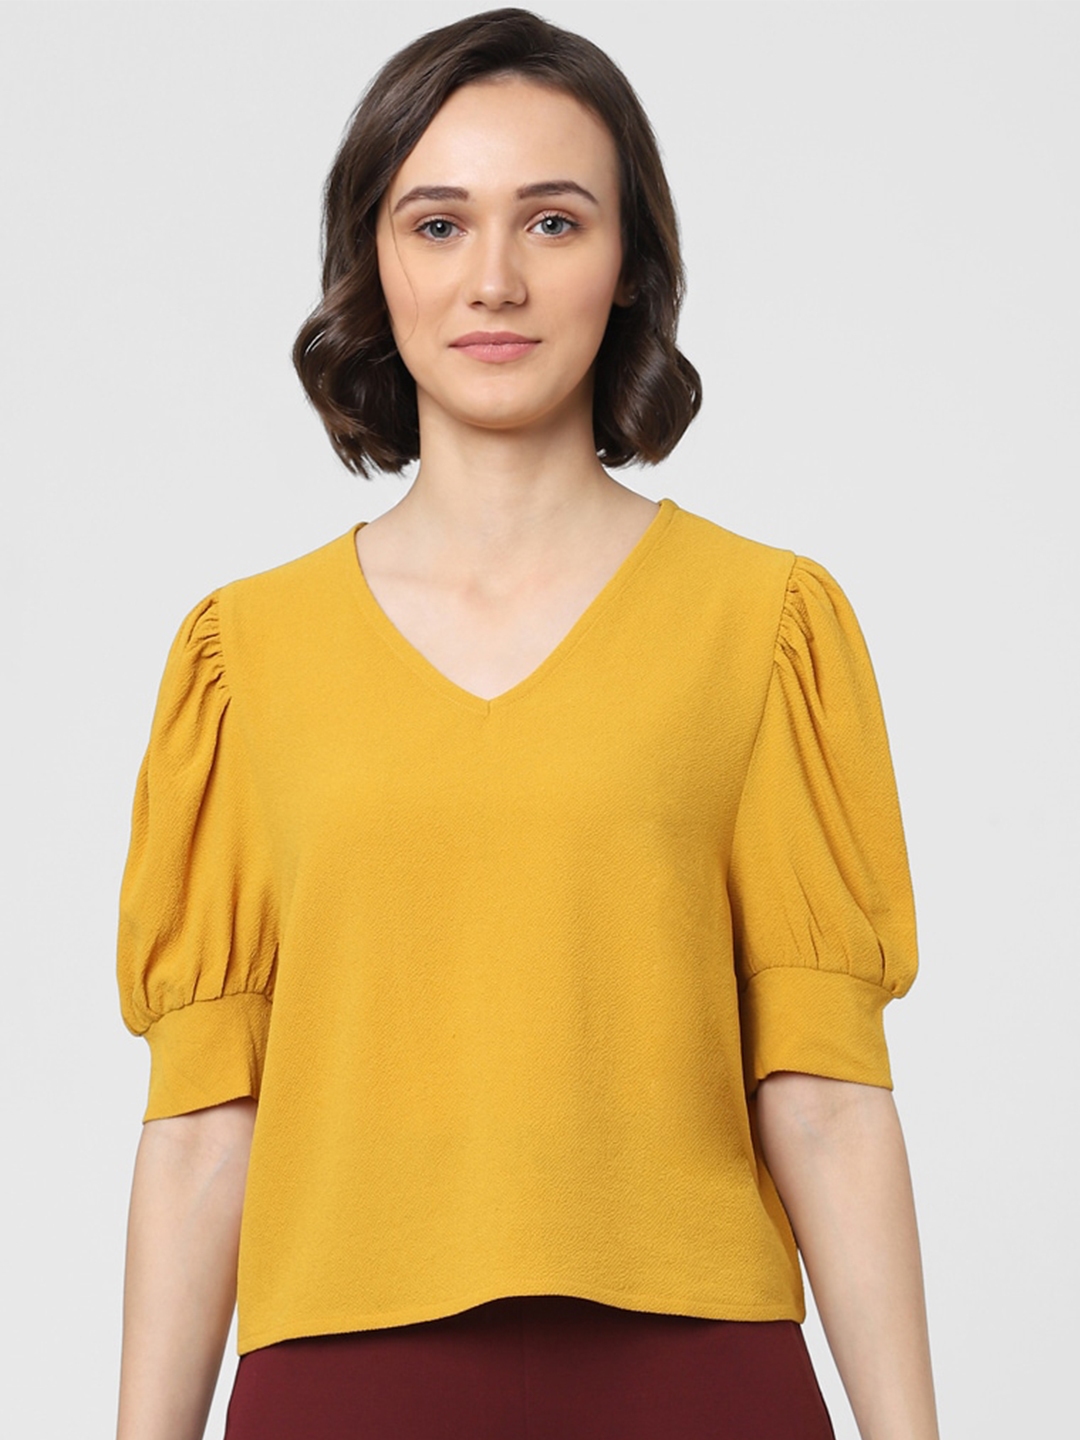 Buy ONLY Women Yellow Solid Top - Tops for Women 17334544 | Myntra